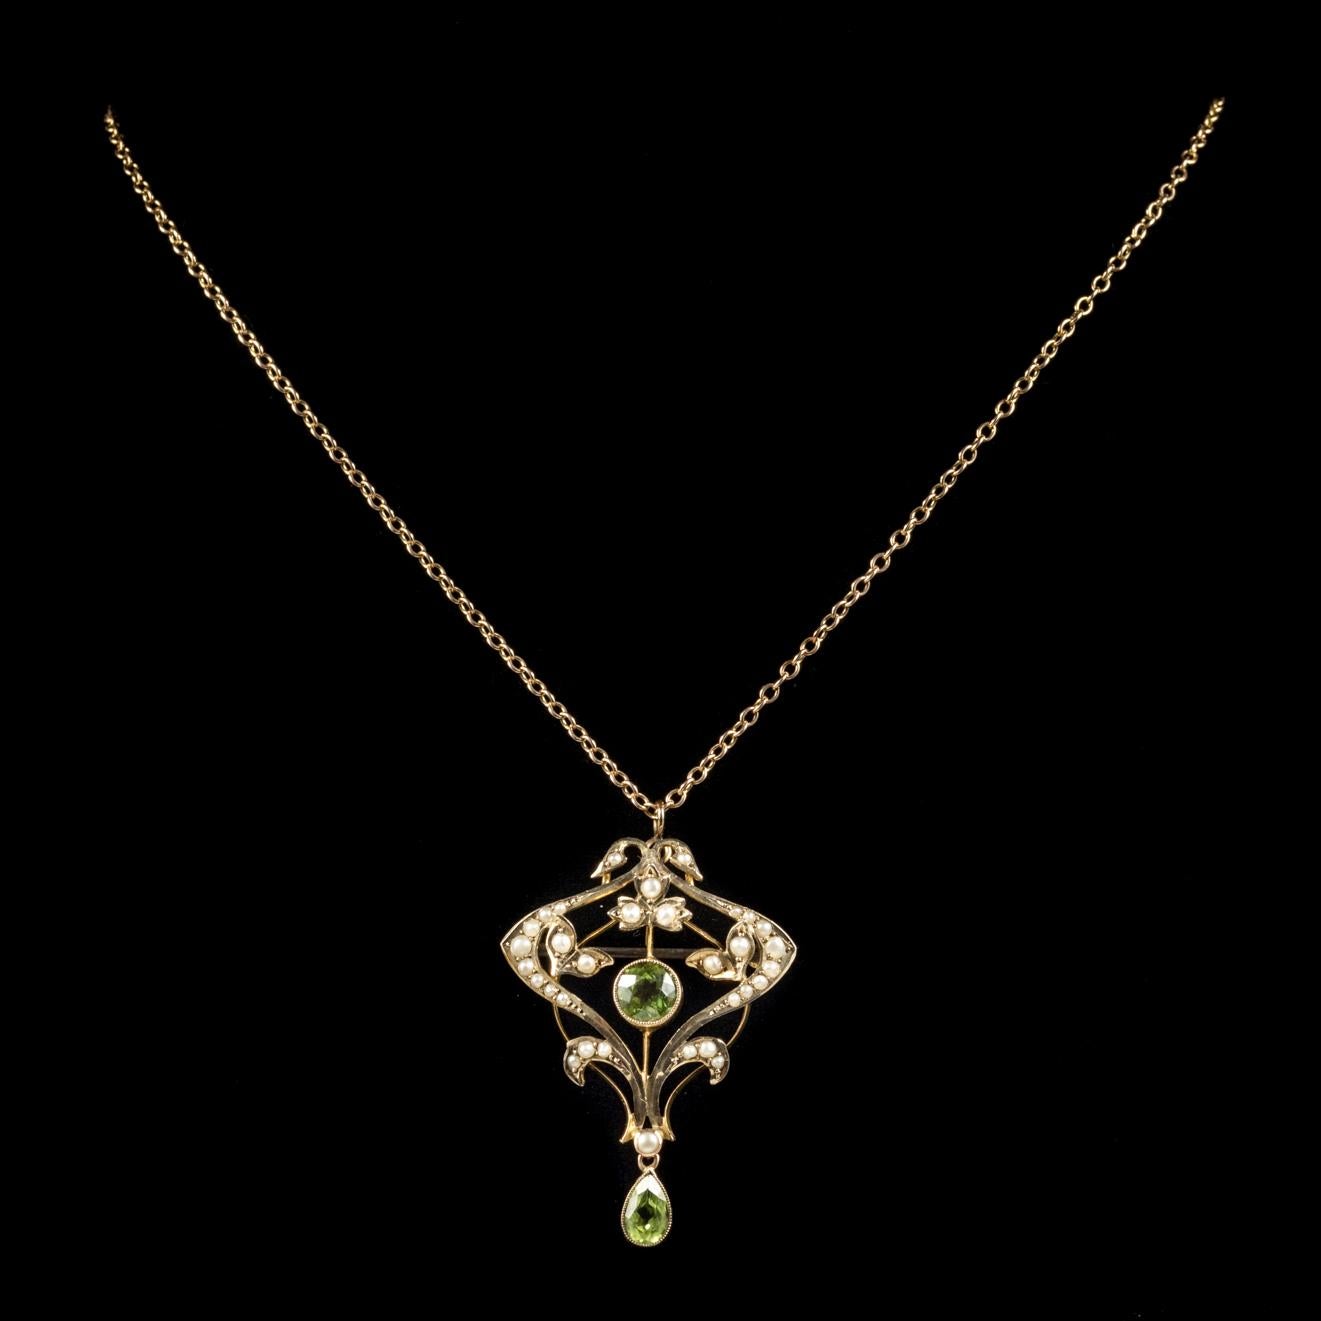 This beautiful antique Gold pendant and chain is from the Victorian era, Circa 1900.

The fabulous pendant is decorated in lustrous Pearls and boasts a rich green Peridot dropper and a 0.65ct Peridot in the centre. 

Peridot is a stone of lightness